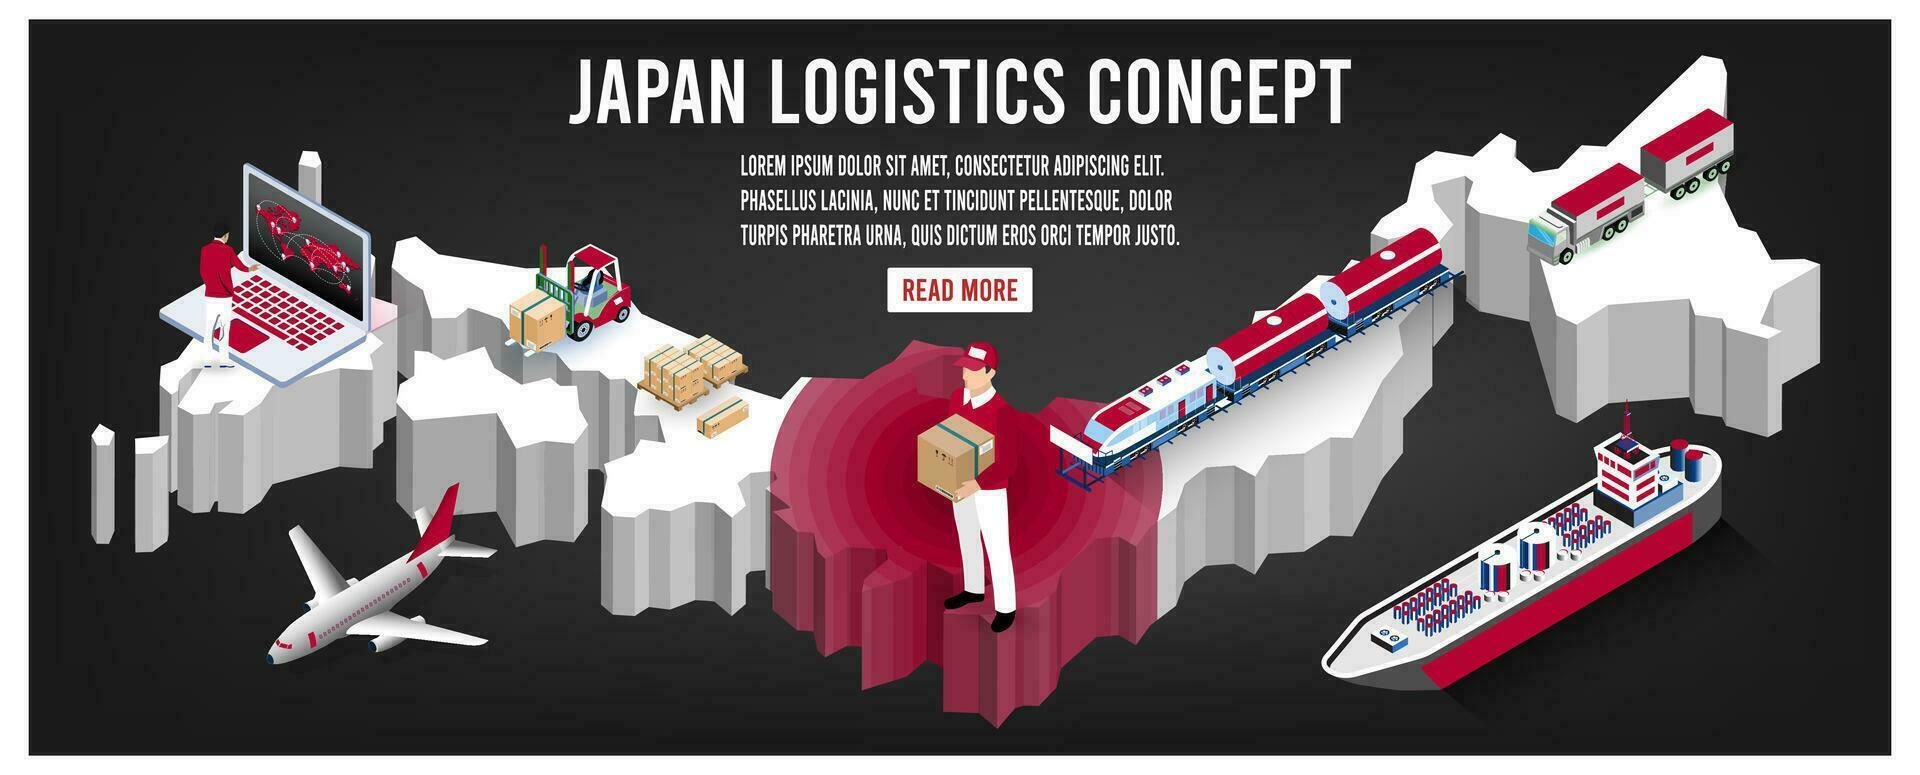 Modern isometric concept of Japan transportation with Global Logistics, Warehouse Logistics, Sea Freight Logistics.  Easy to edit and customize. Vector illustration eps10